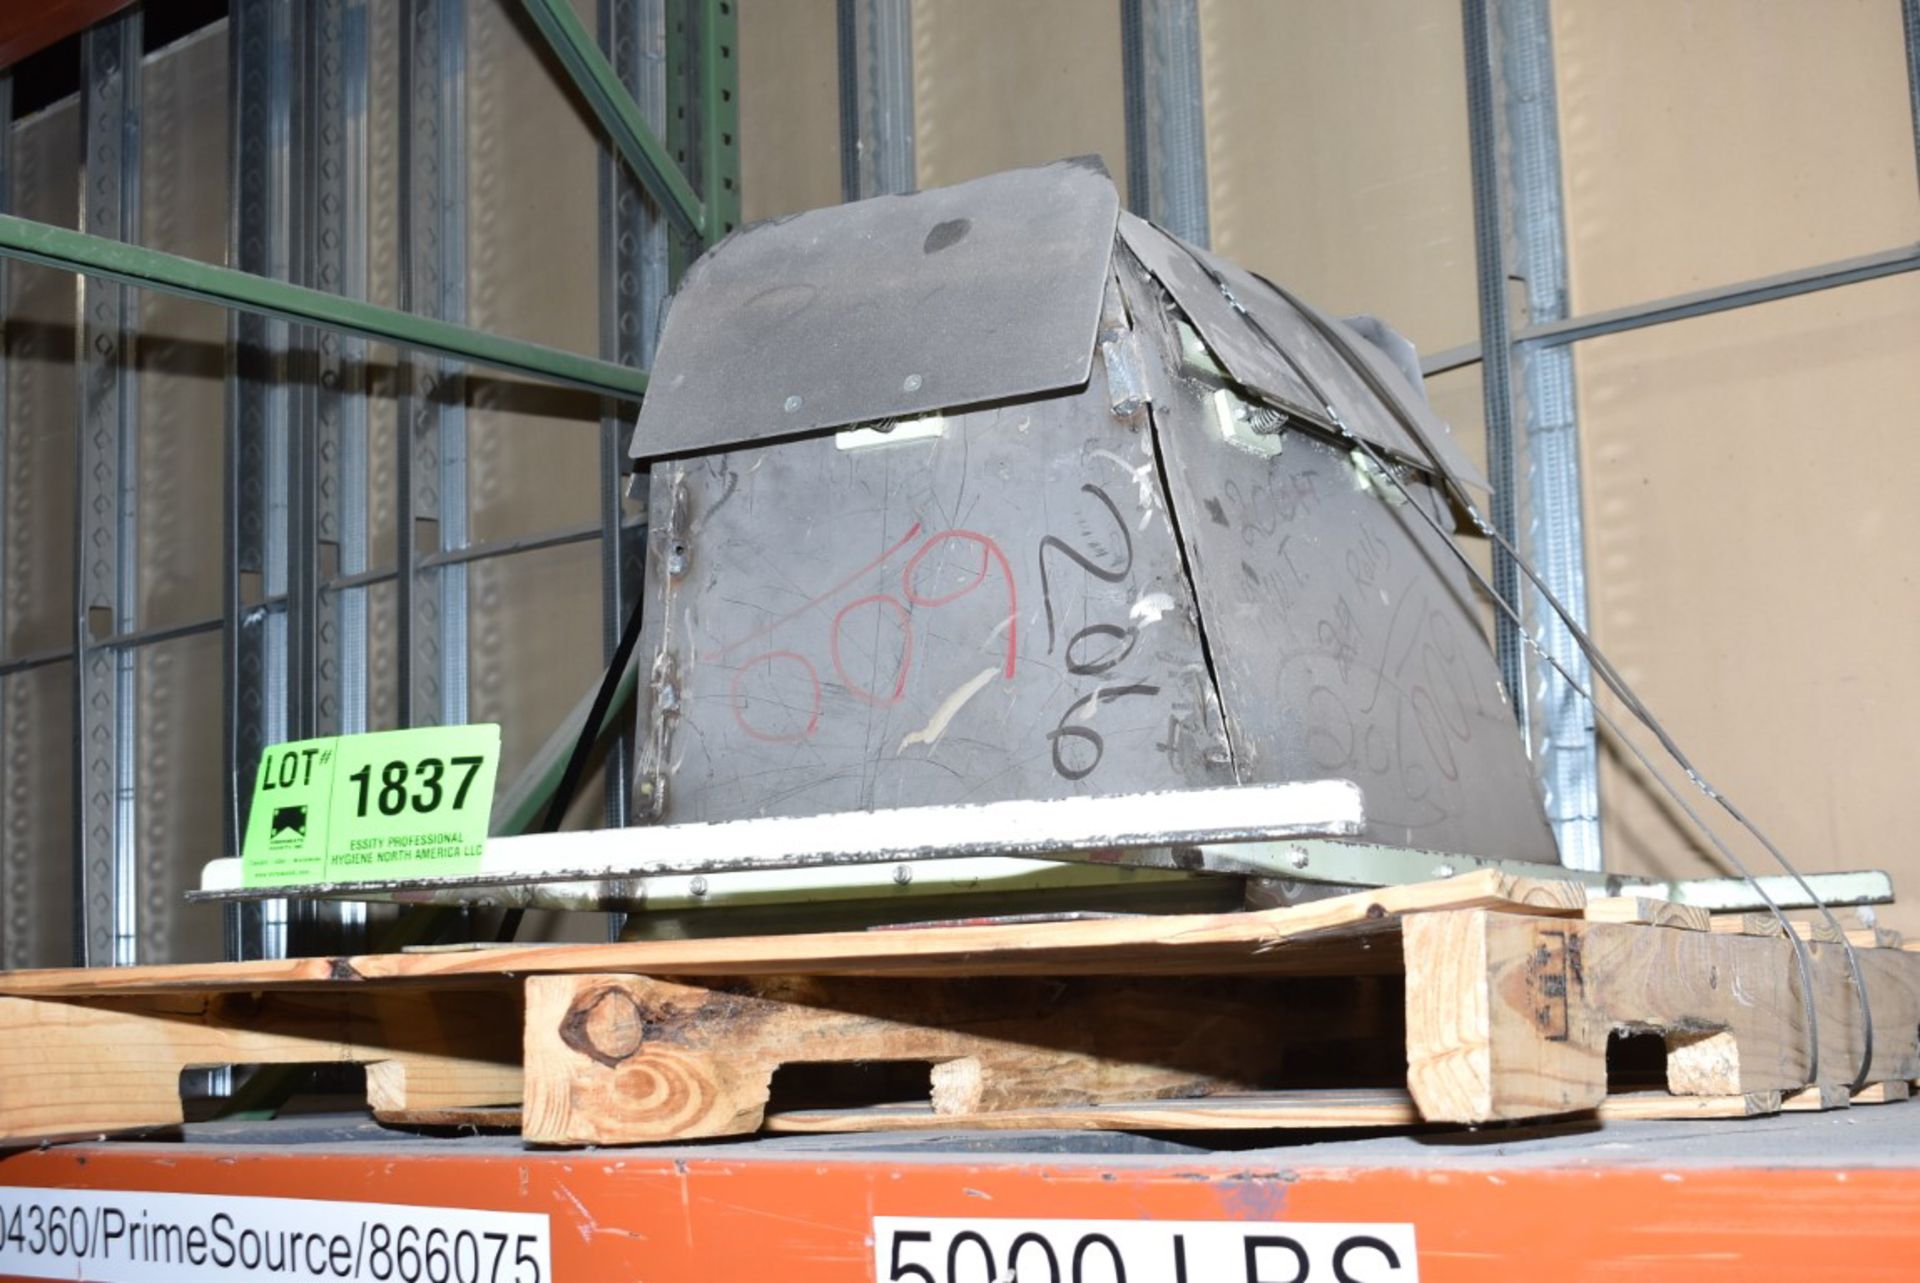 EQUIPMENT COVER [RIGGING FEE FOR LOT #1837 - $25 USD PLUS APPLICABLE TAXES] - Image 2 of 2